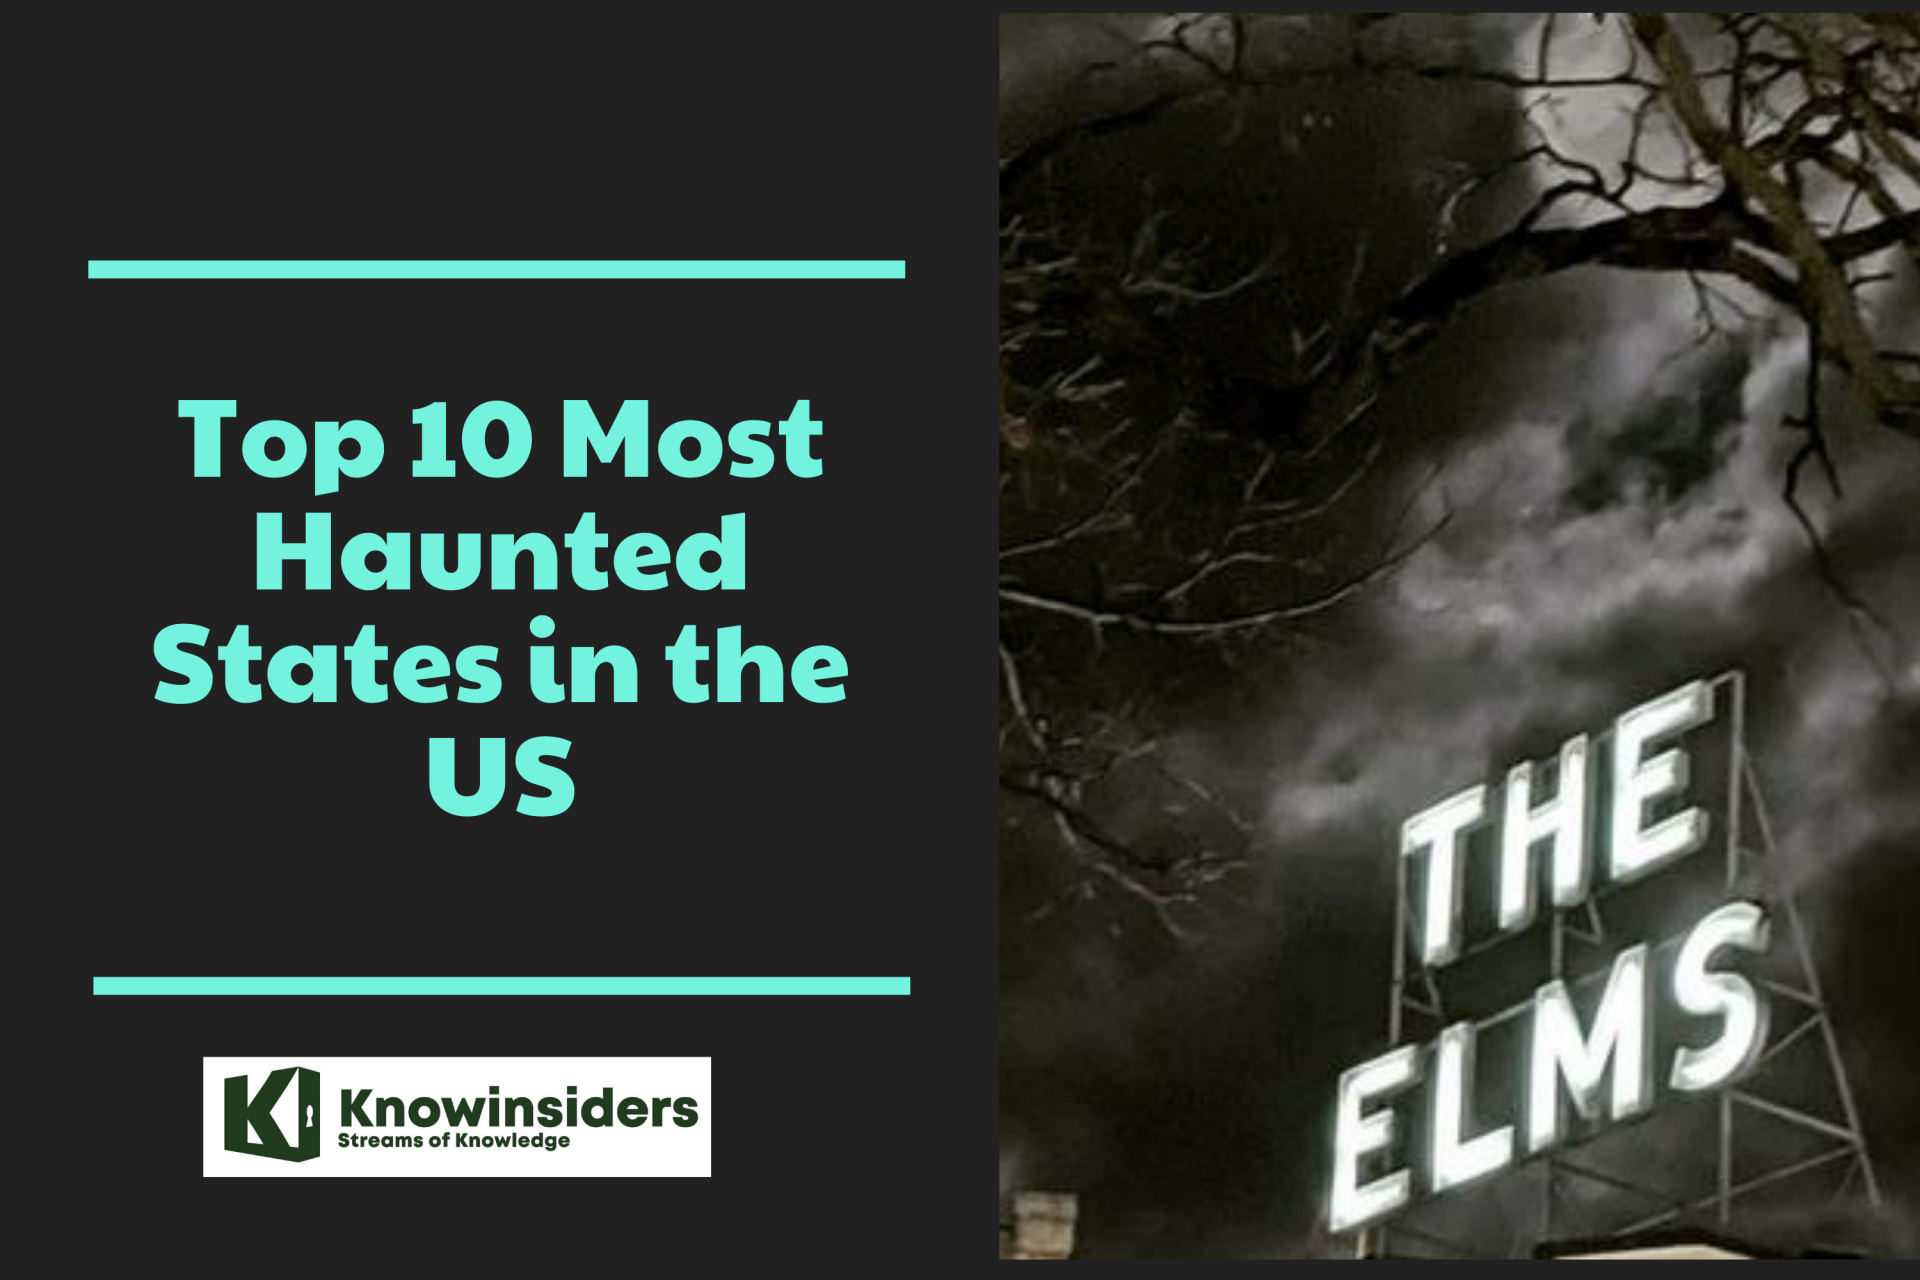 Top 10 Most Haunted States in the US with the Ghost Stories